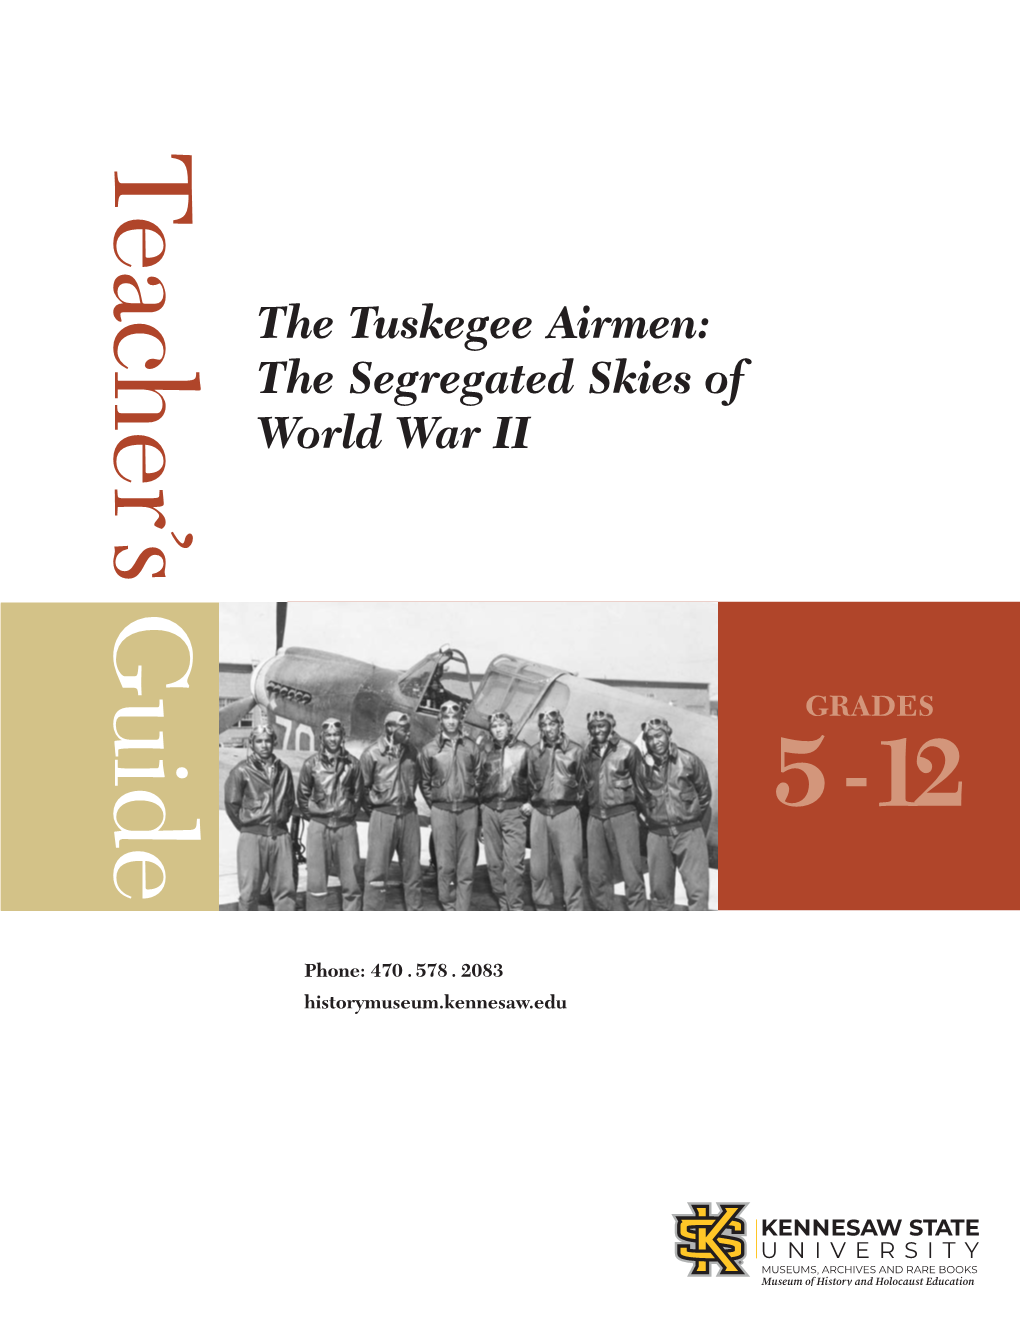 The Tuskegee Airmen: the Segregated Skies of World War II Guide